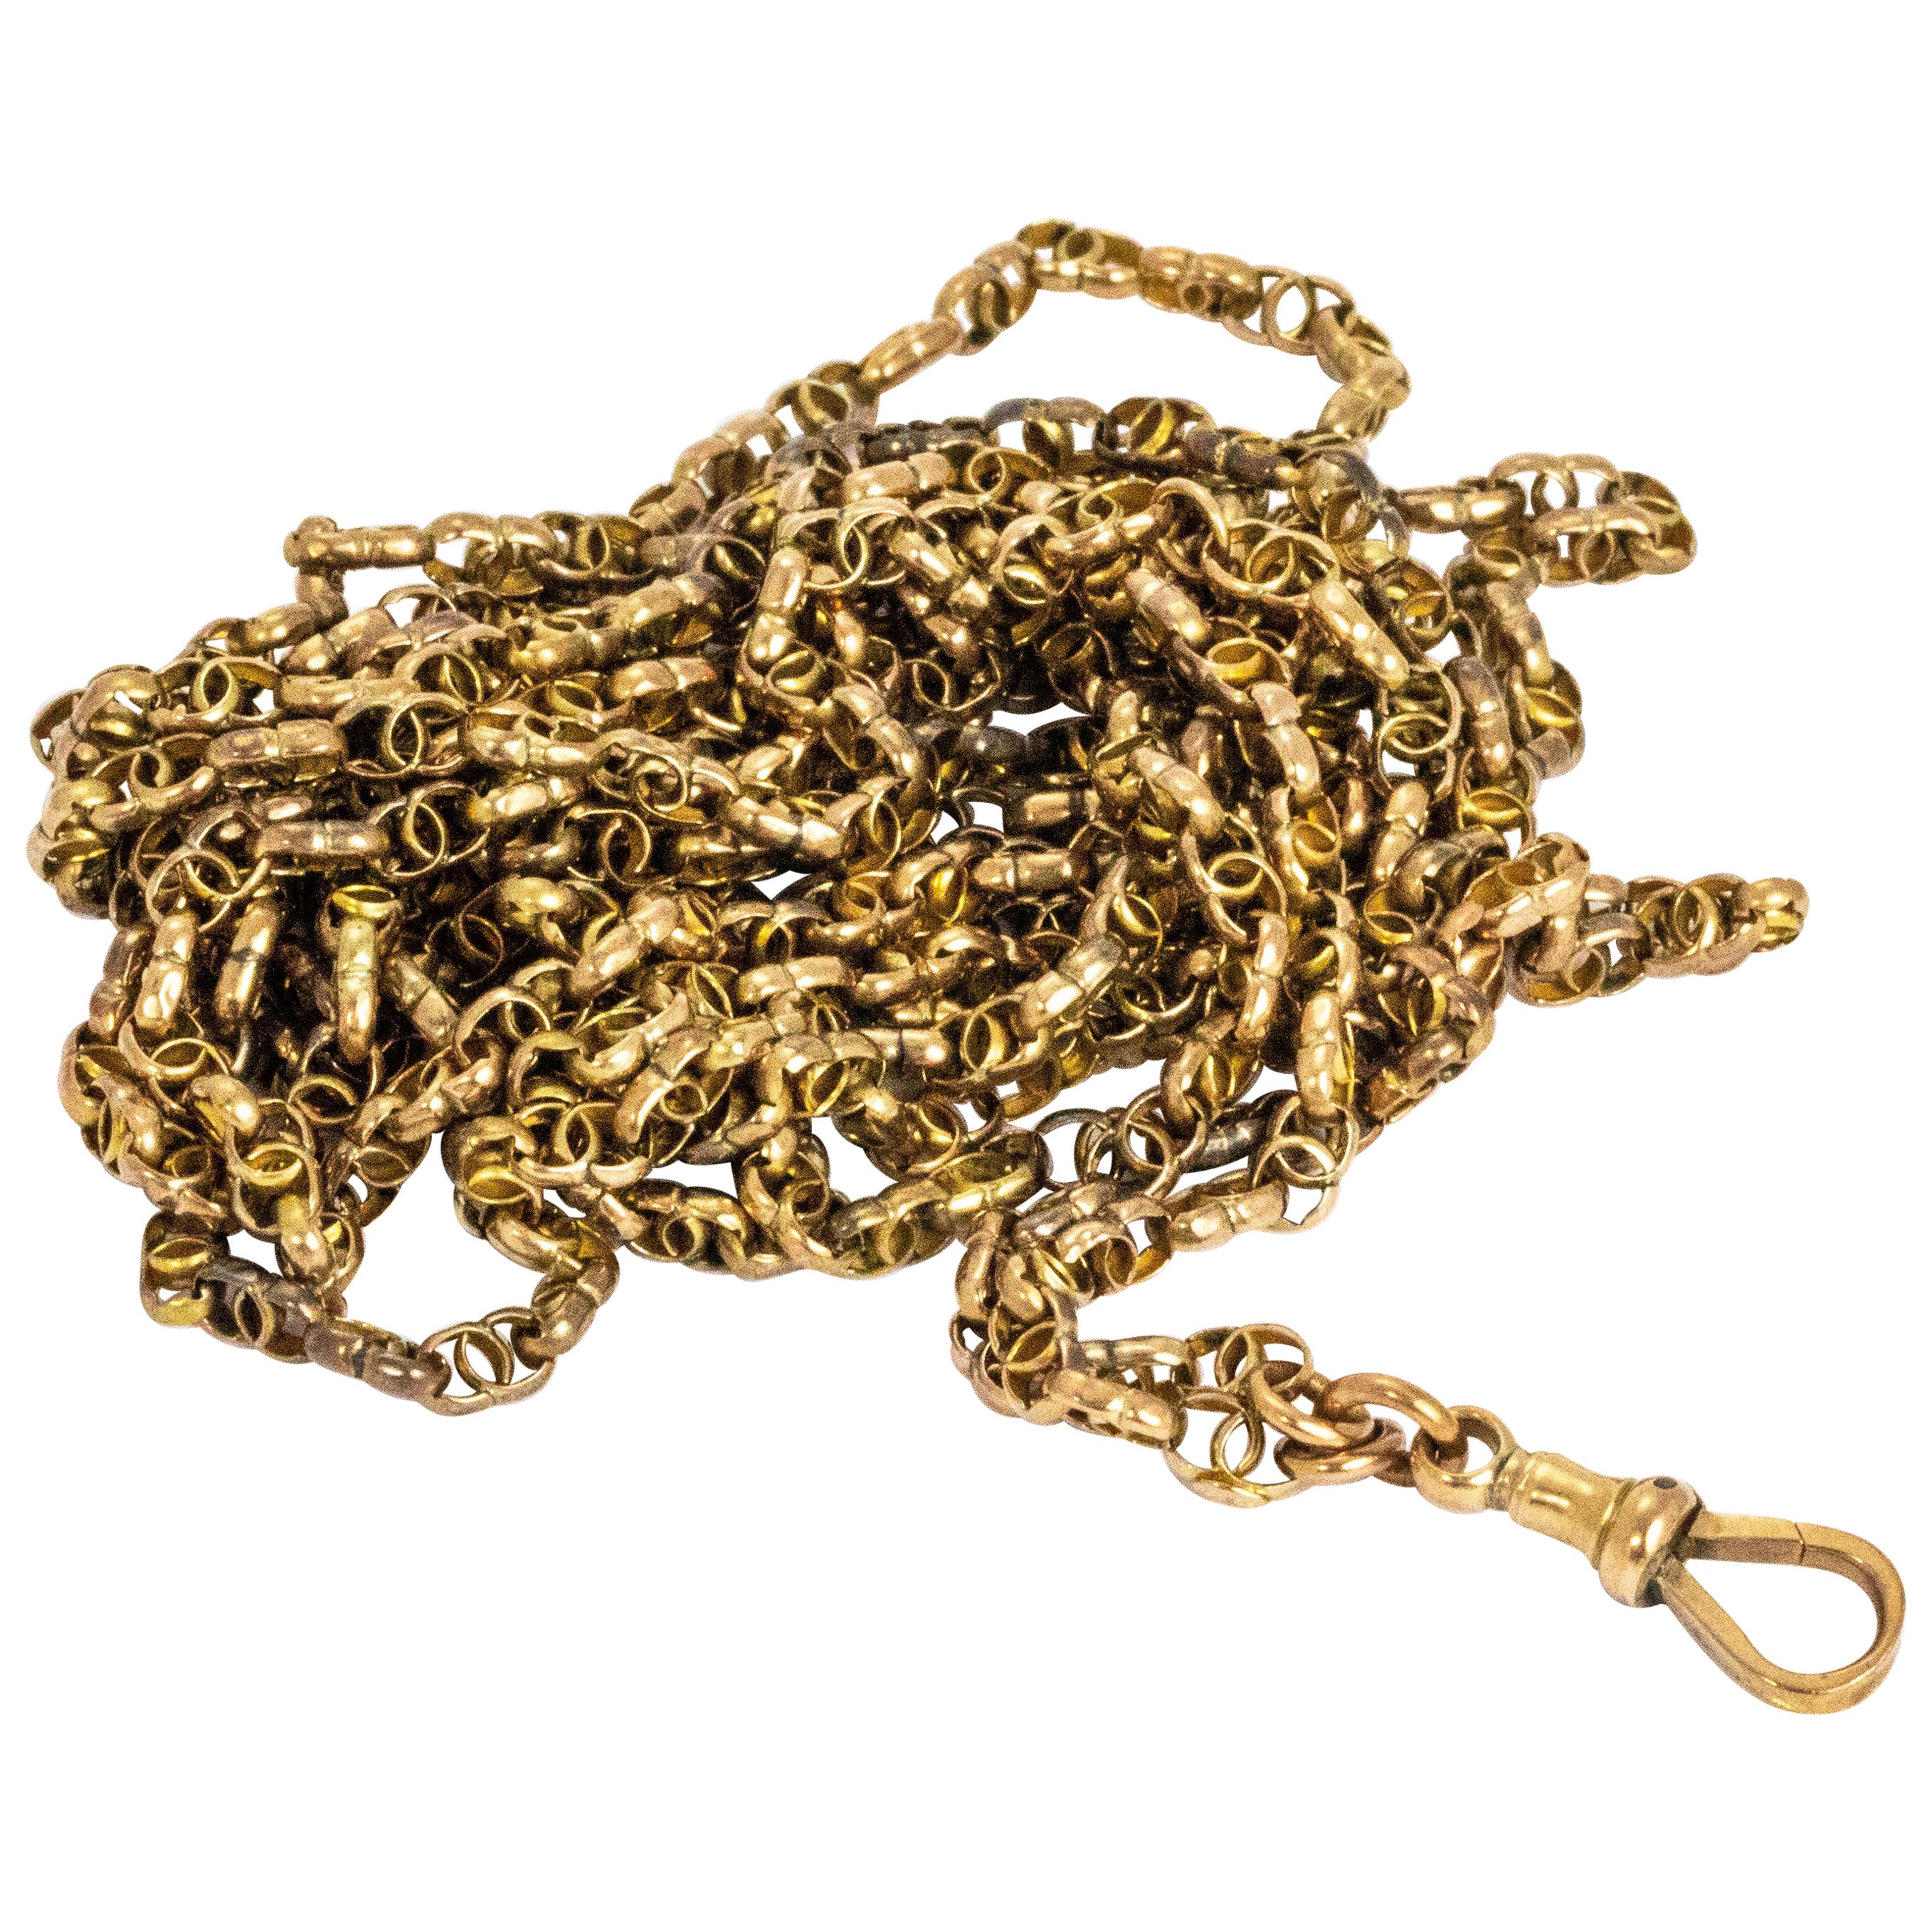 Victorian 9 Carat Gold Longuard Chain with Dog Clip